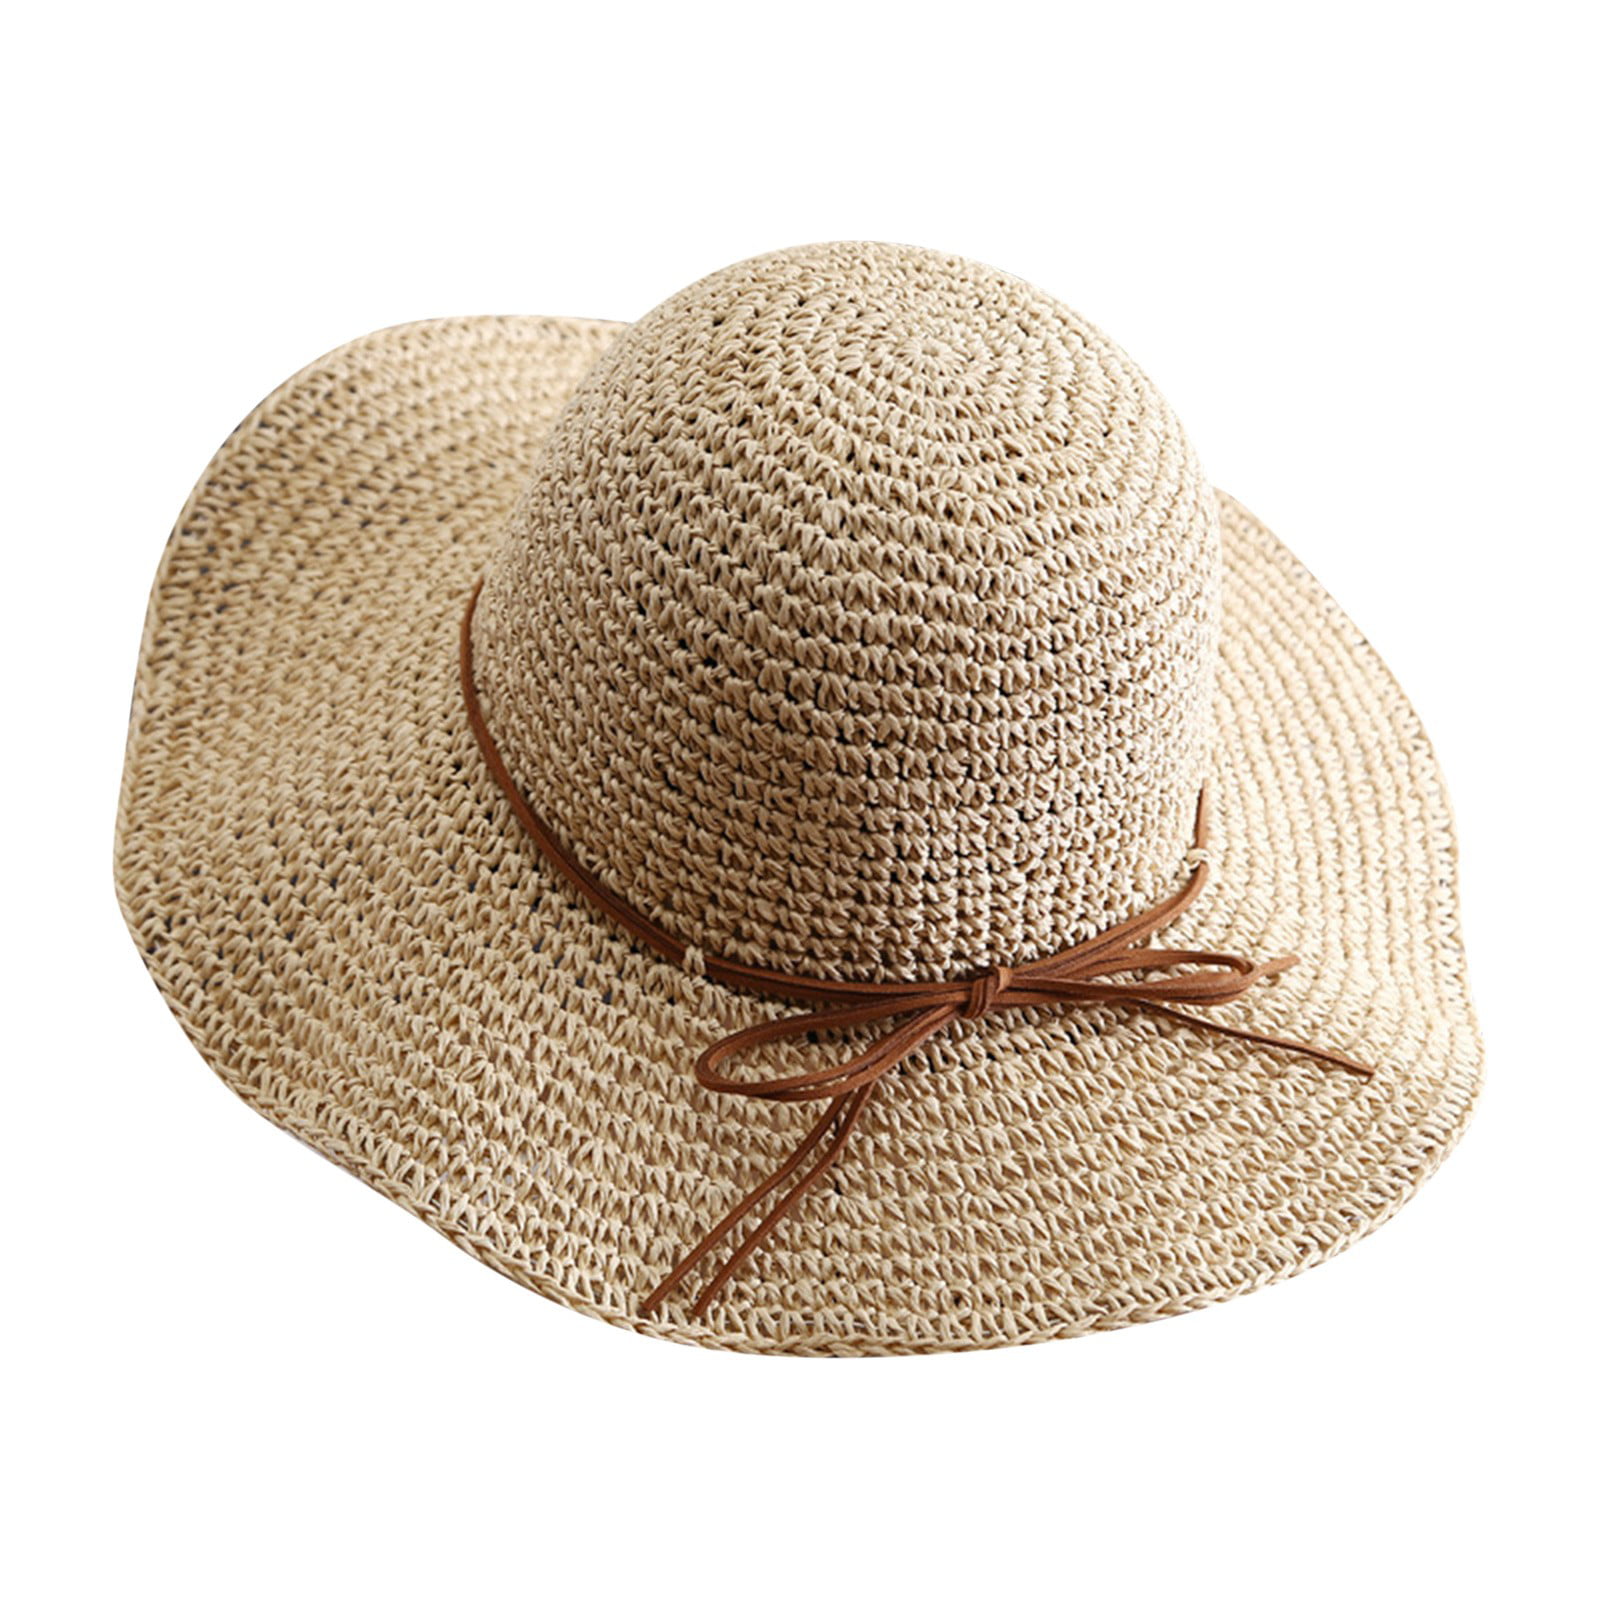 KDDYLITQ Savings Clearance! Mens Straw Hats Wide Brim Sun Hats for Women Uv  Protection Wide Brim Summer Hats for Women Beach Beige Free Size 